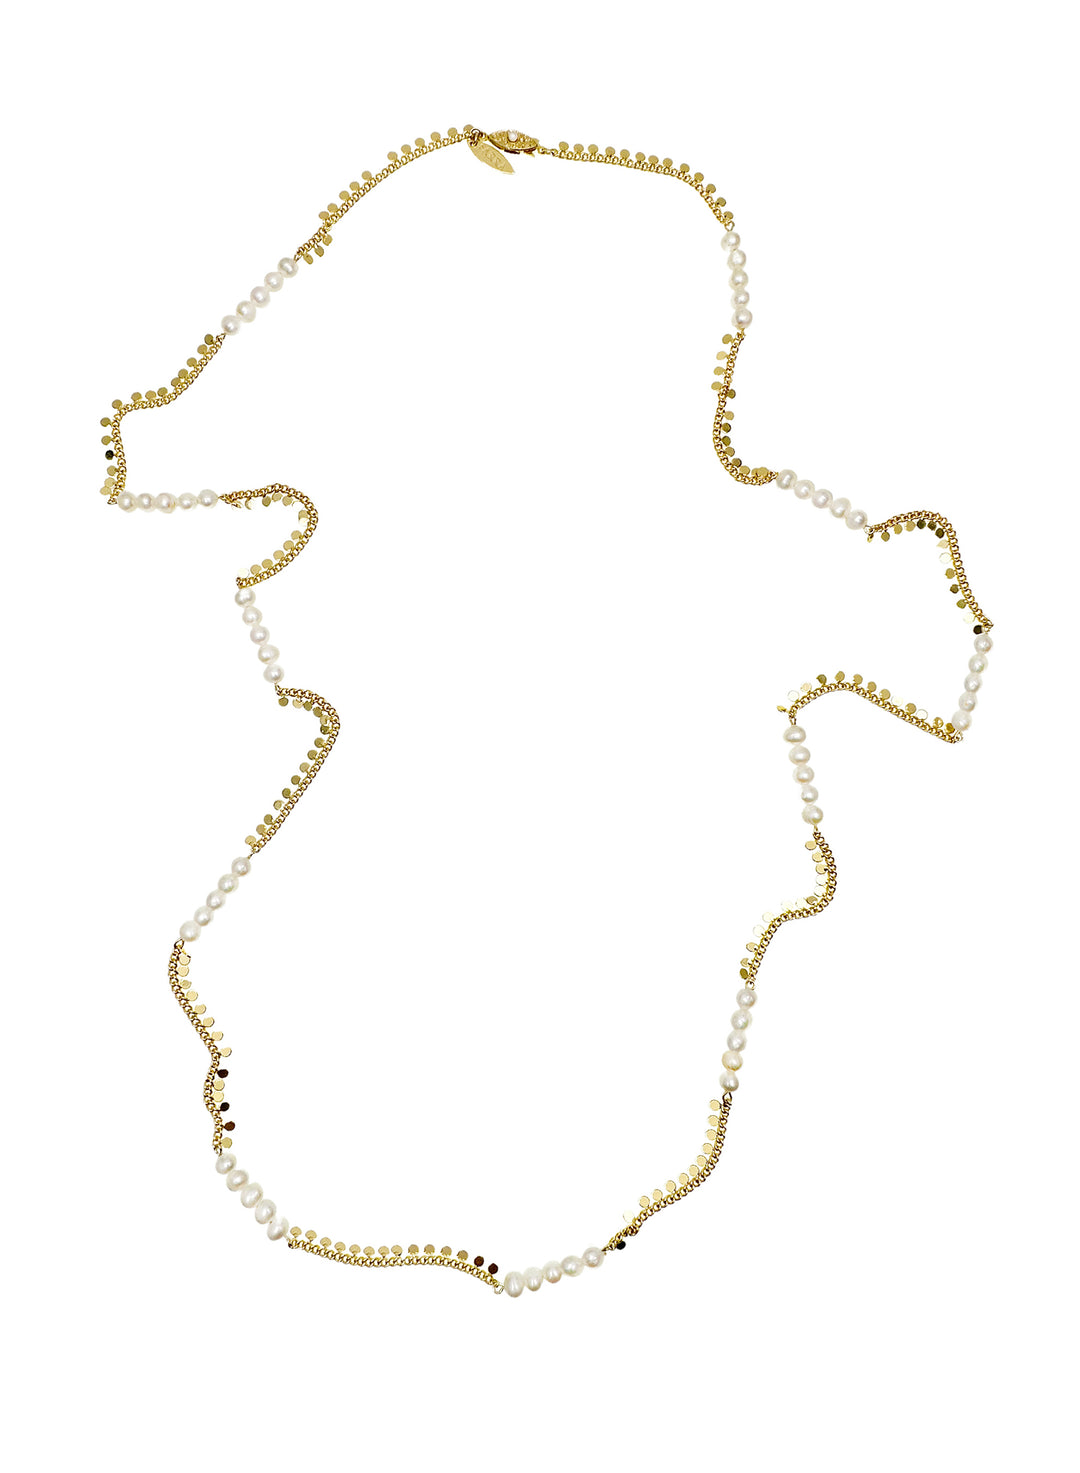 Gold Chain with Freshwater Pearls Long Necklace LN065 - FARRA